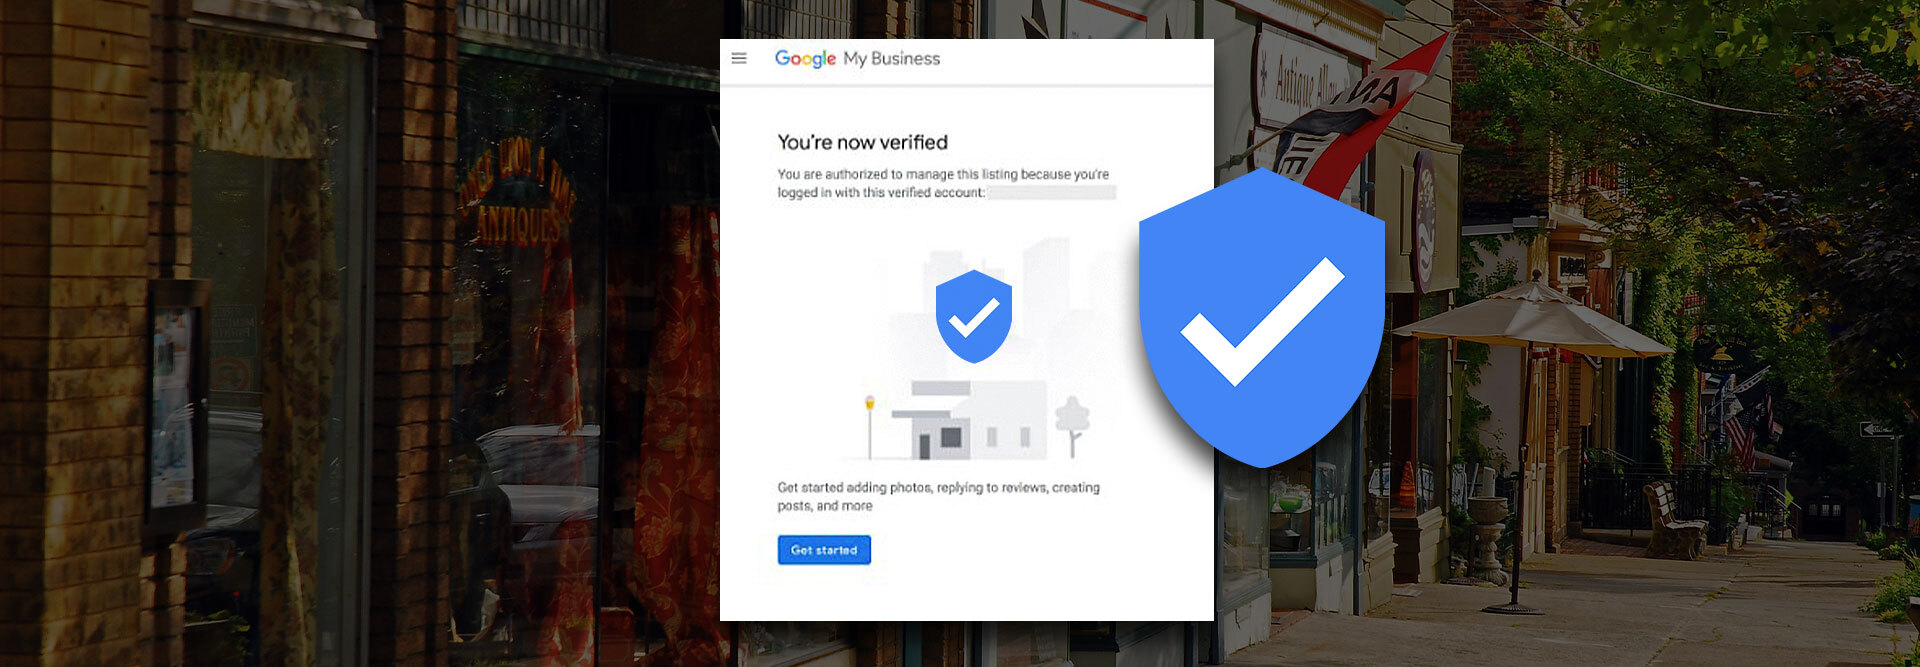 A screenshot of the “You’re now verified” page on the Google My Business website, with the verification logo displayed right beside it